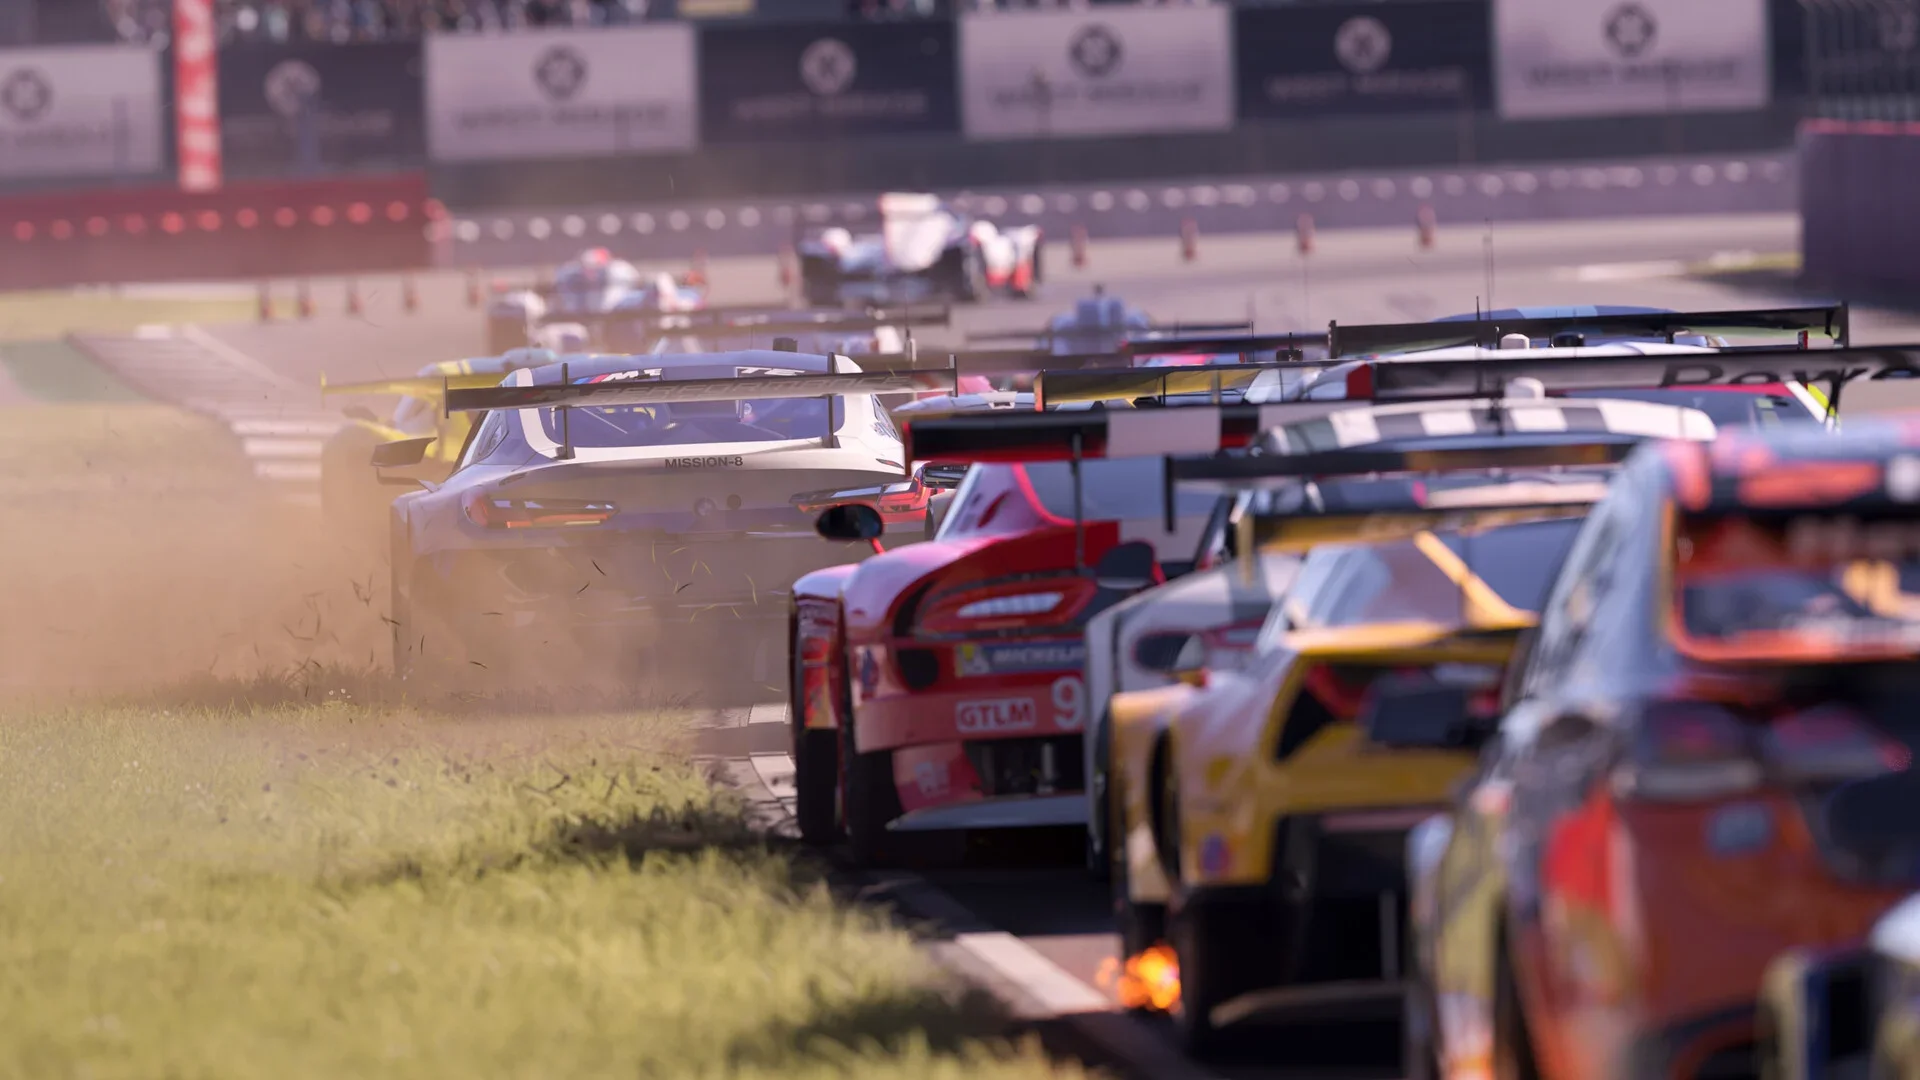 Forza Motorsport reveals classic Le Mans circuit in new trailer